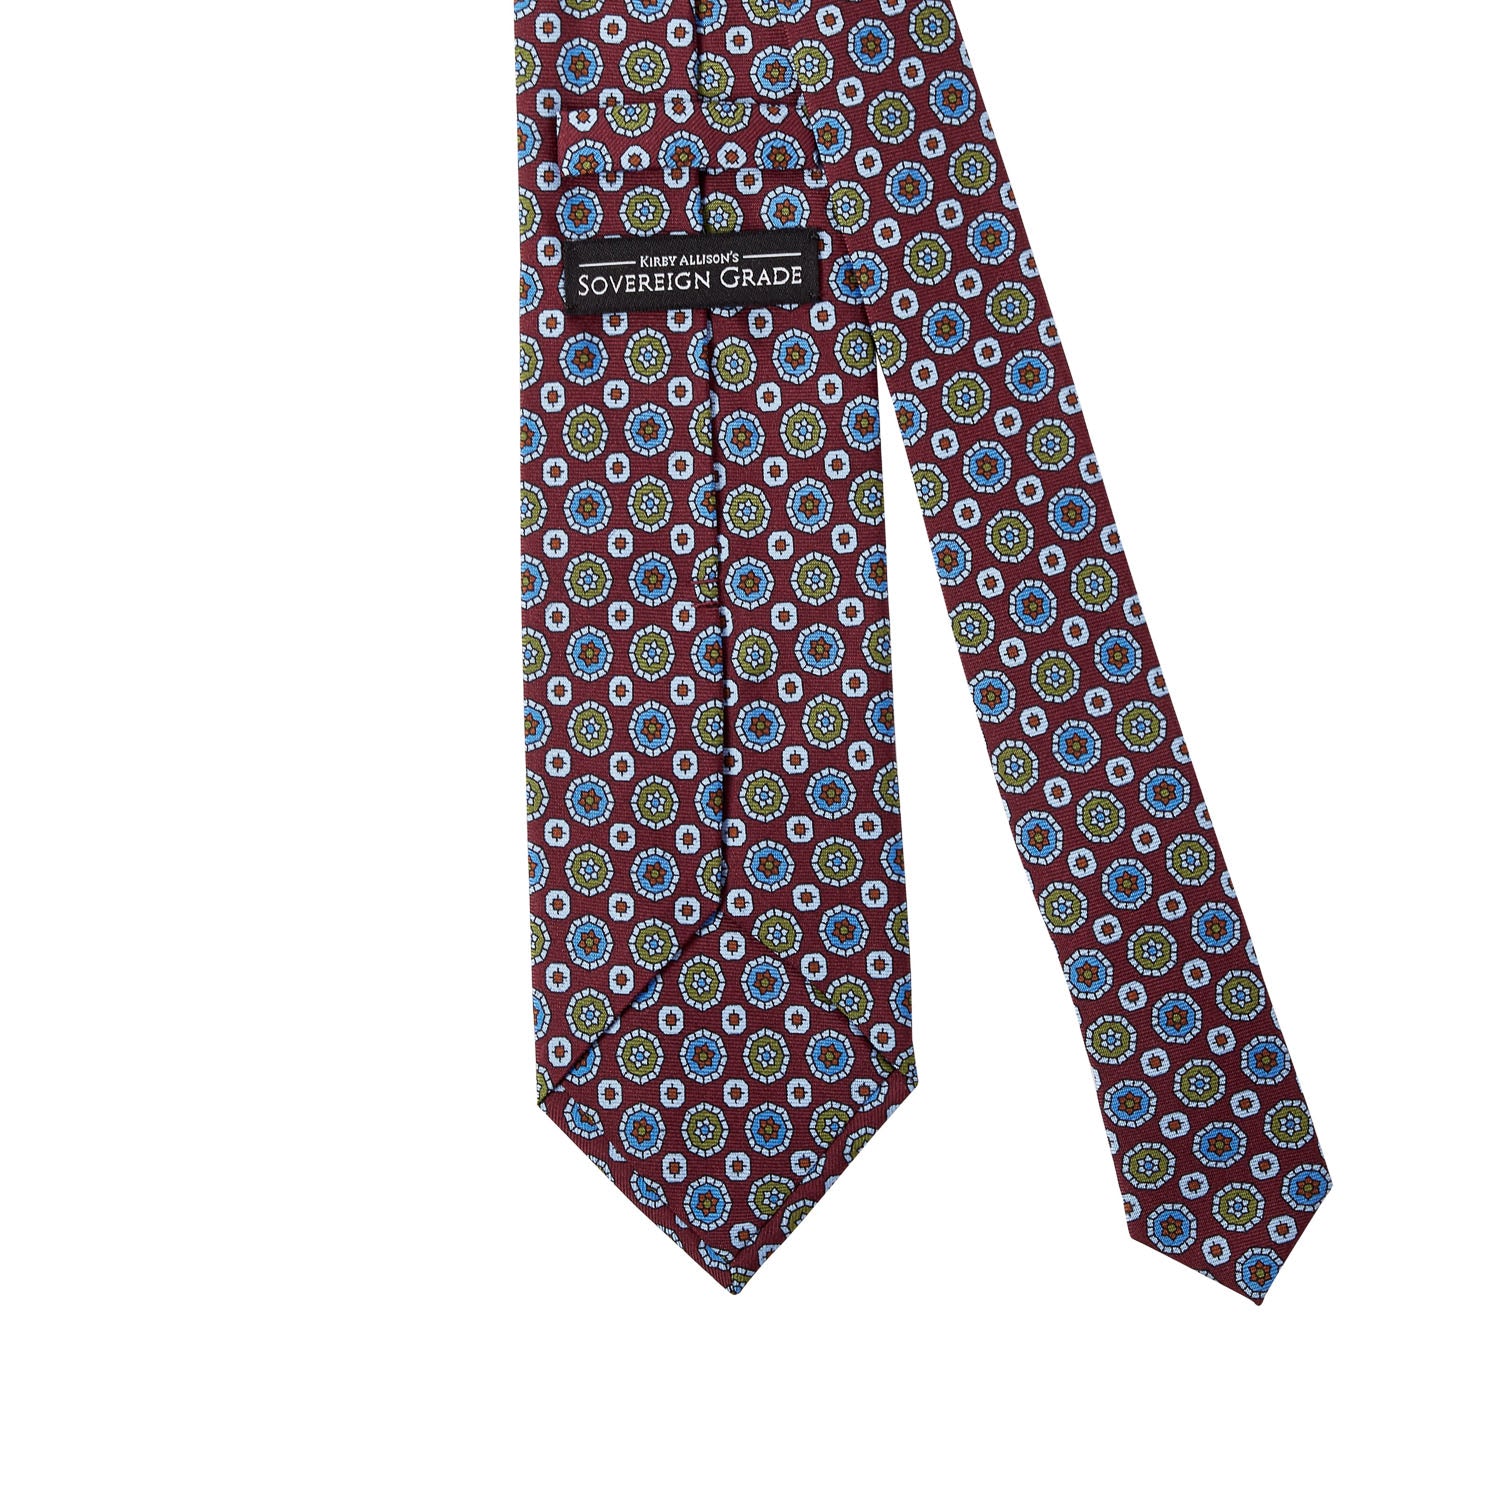 A Sovereign Grade Burgundy 36oz Printed Silk Maccesfield Tie by KirbyAllison.com with a red, blue and green pattern.